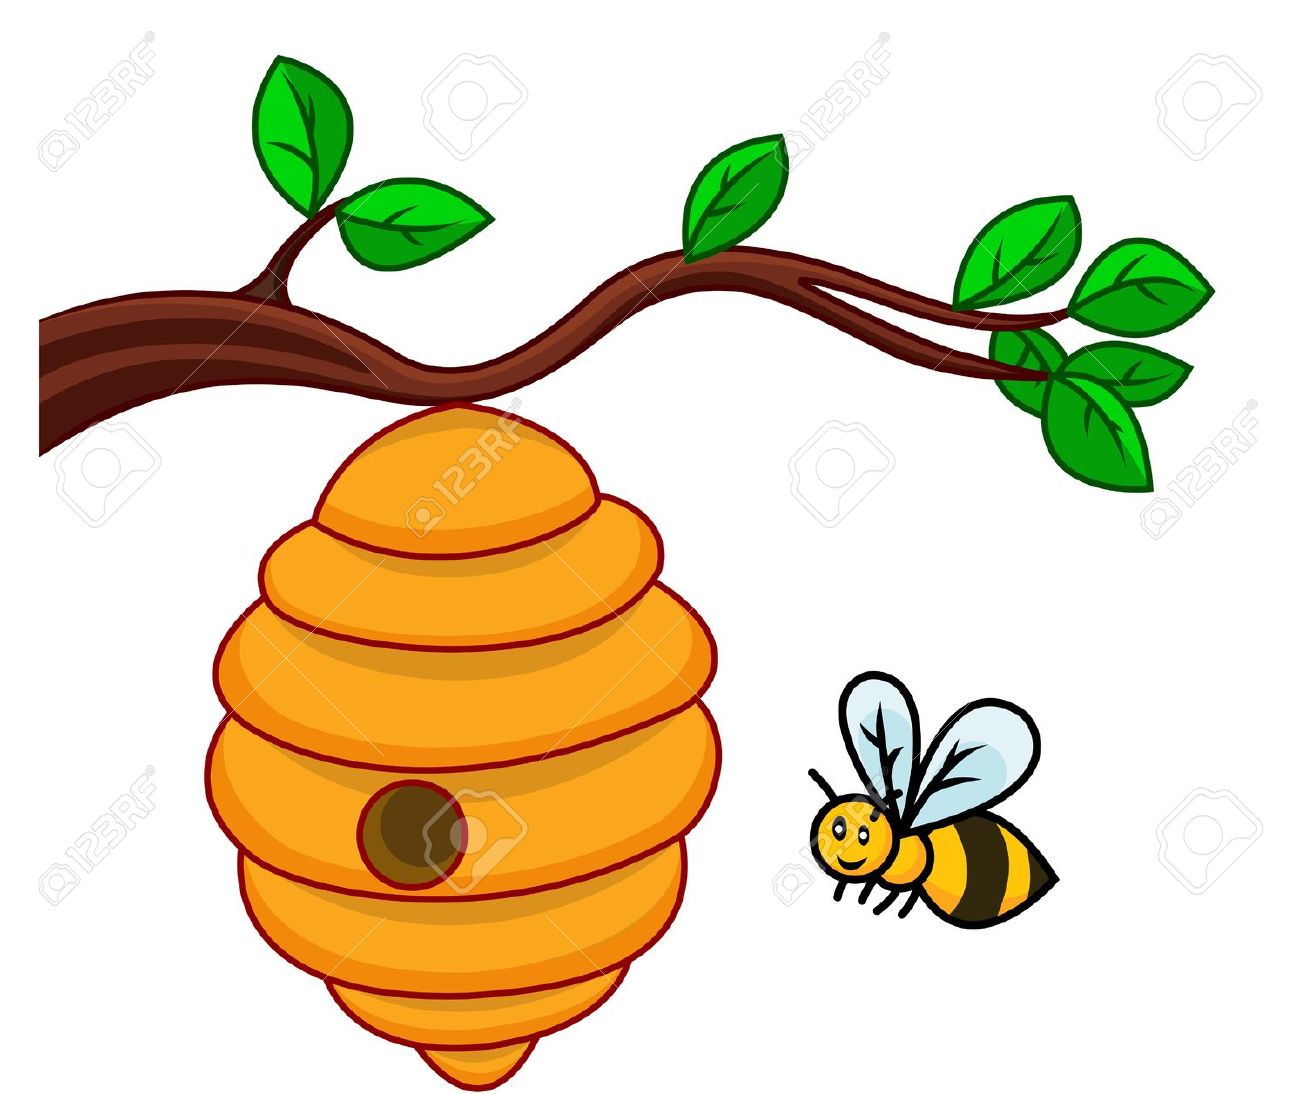 beehive clipart. beehive: ill - Beehive Clip Art